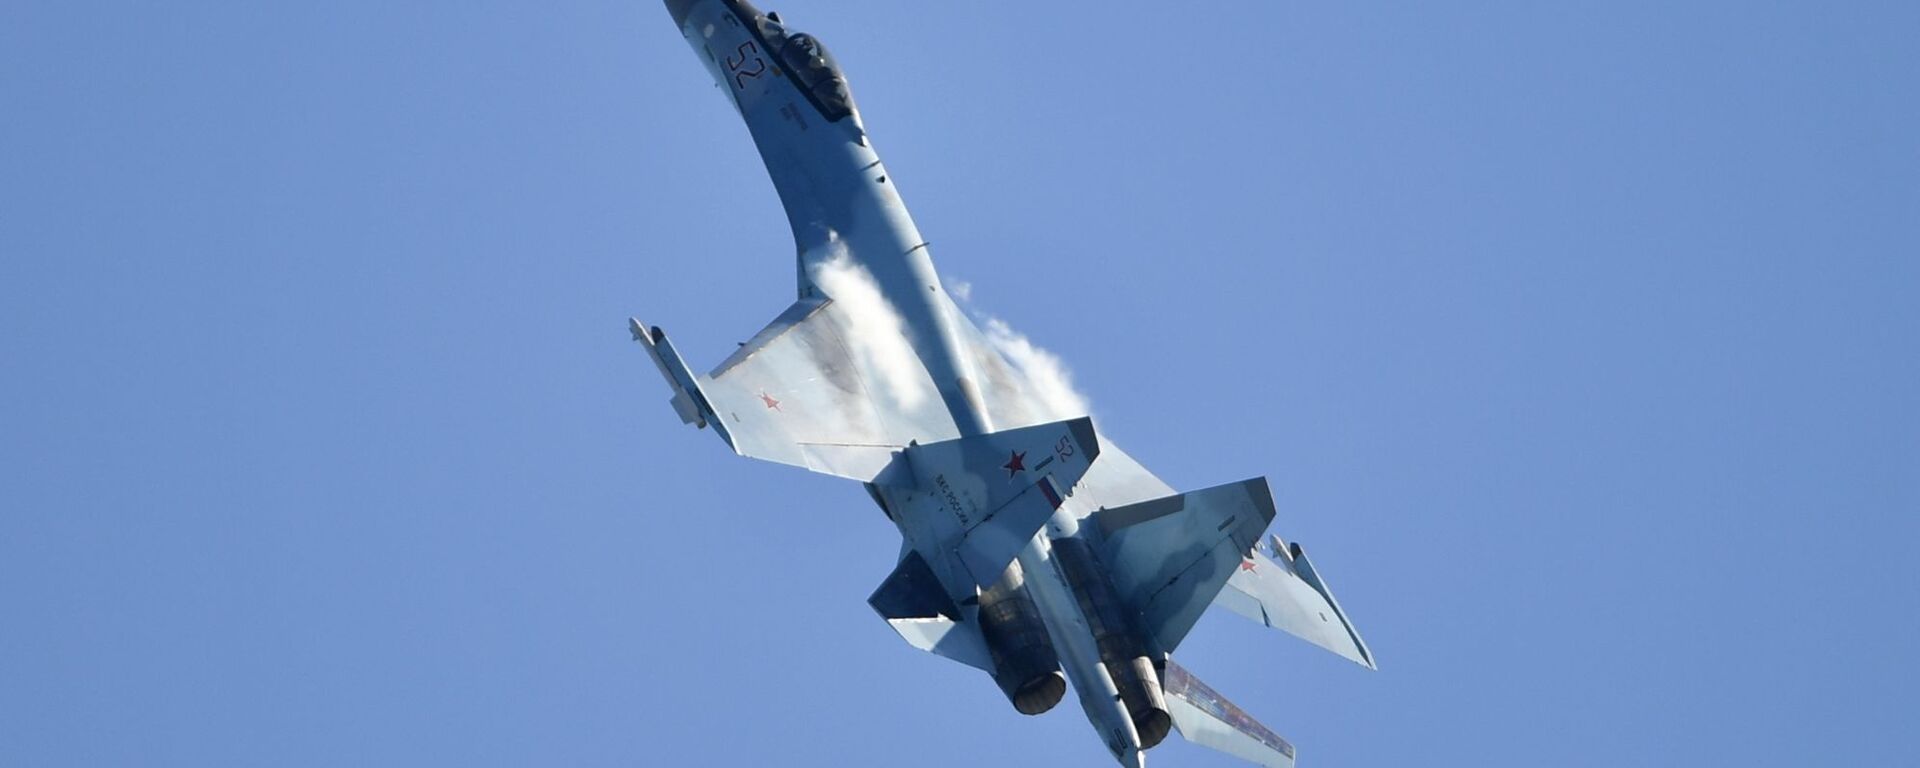 Russia's multipurpose Su-35 jet performs at the MAKS-2019 international aviation and space show in Zhukovsky outside Moscow. - Sputnik International, 1920, 09.11.2020